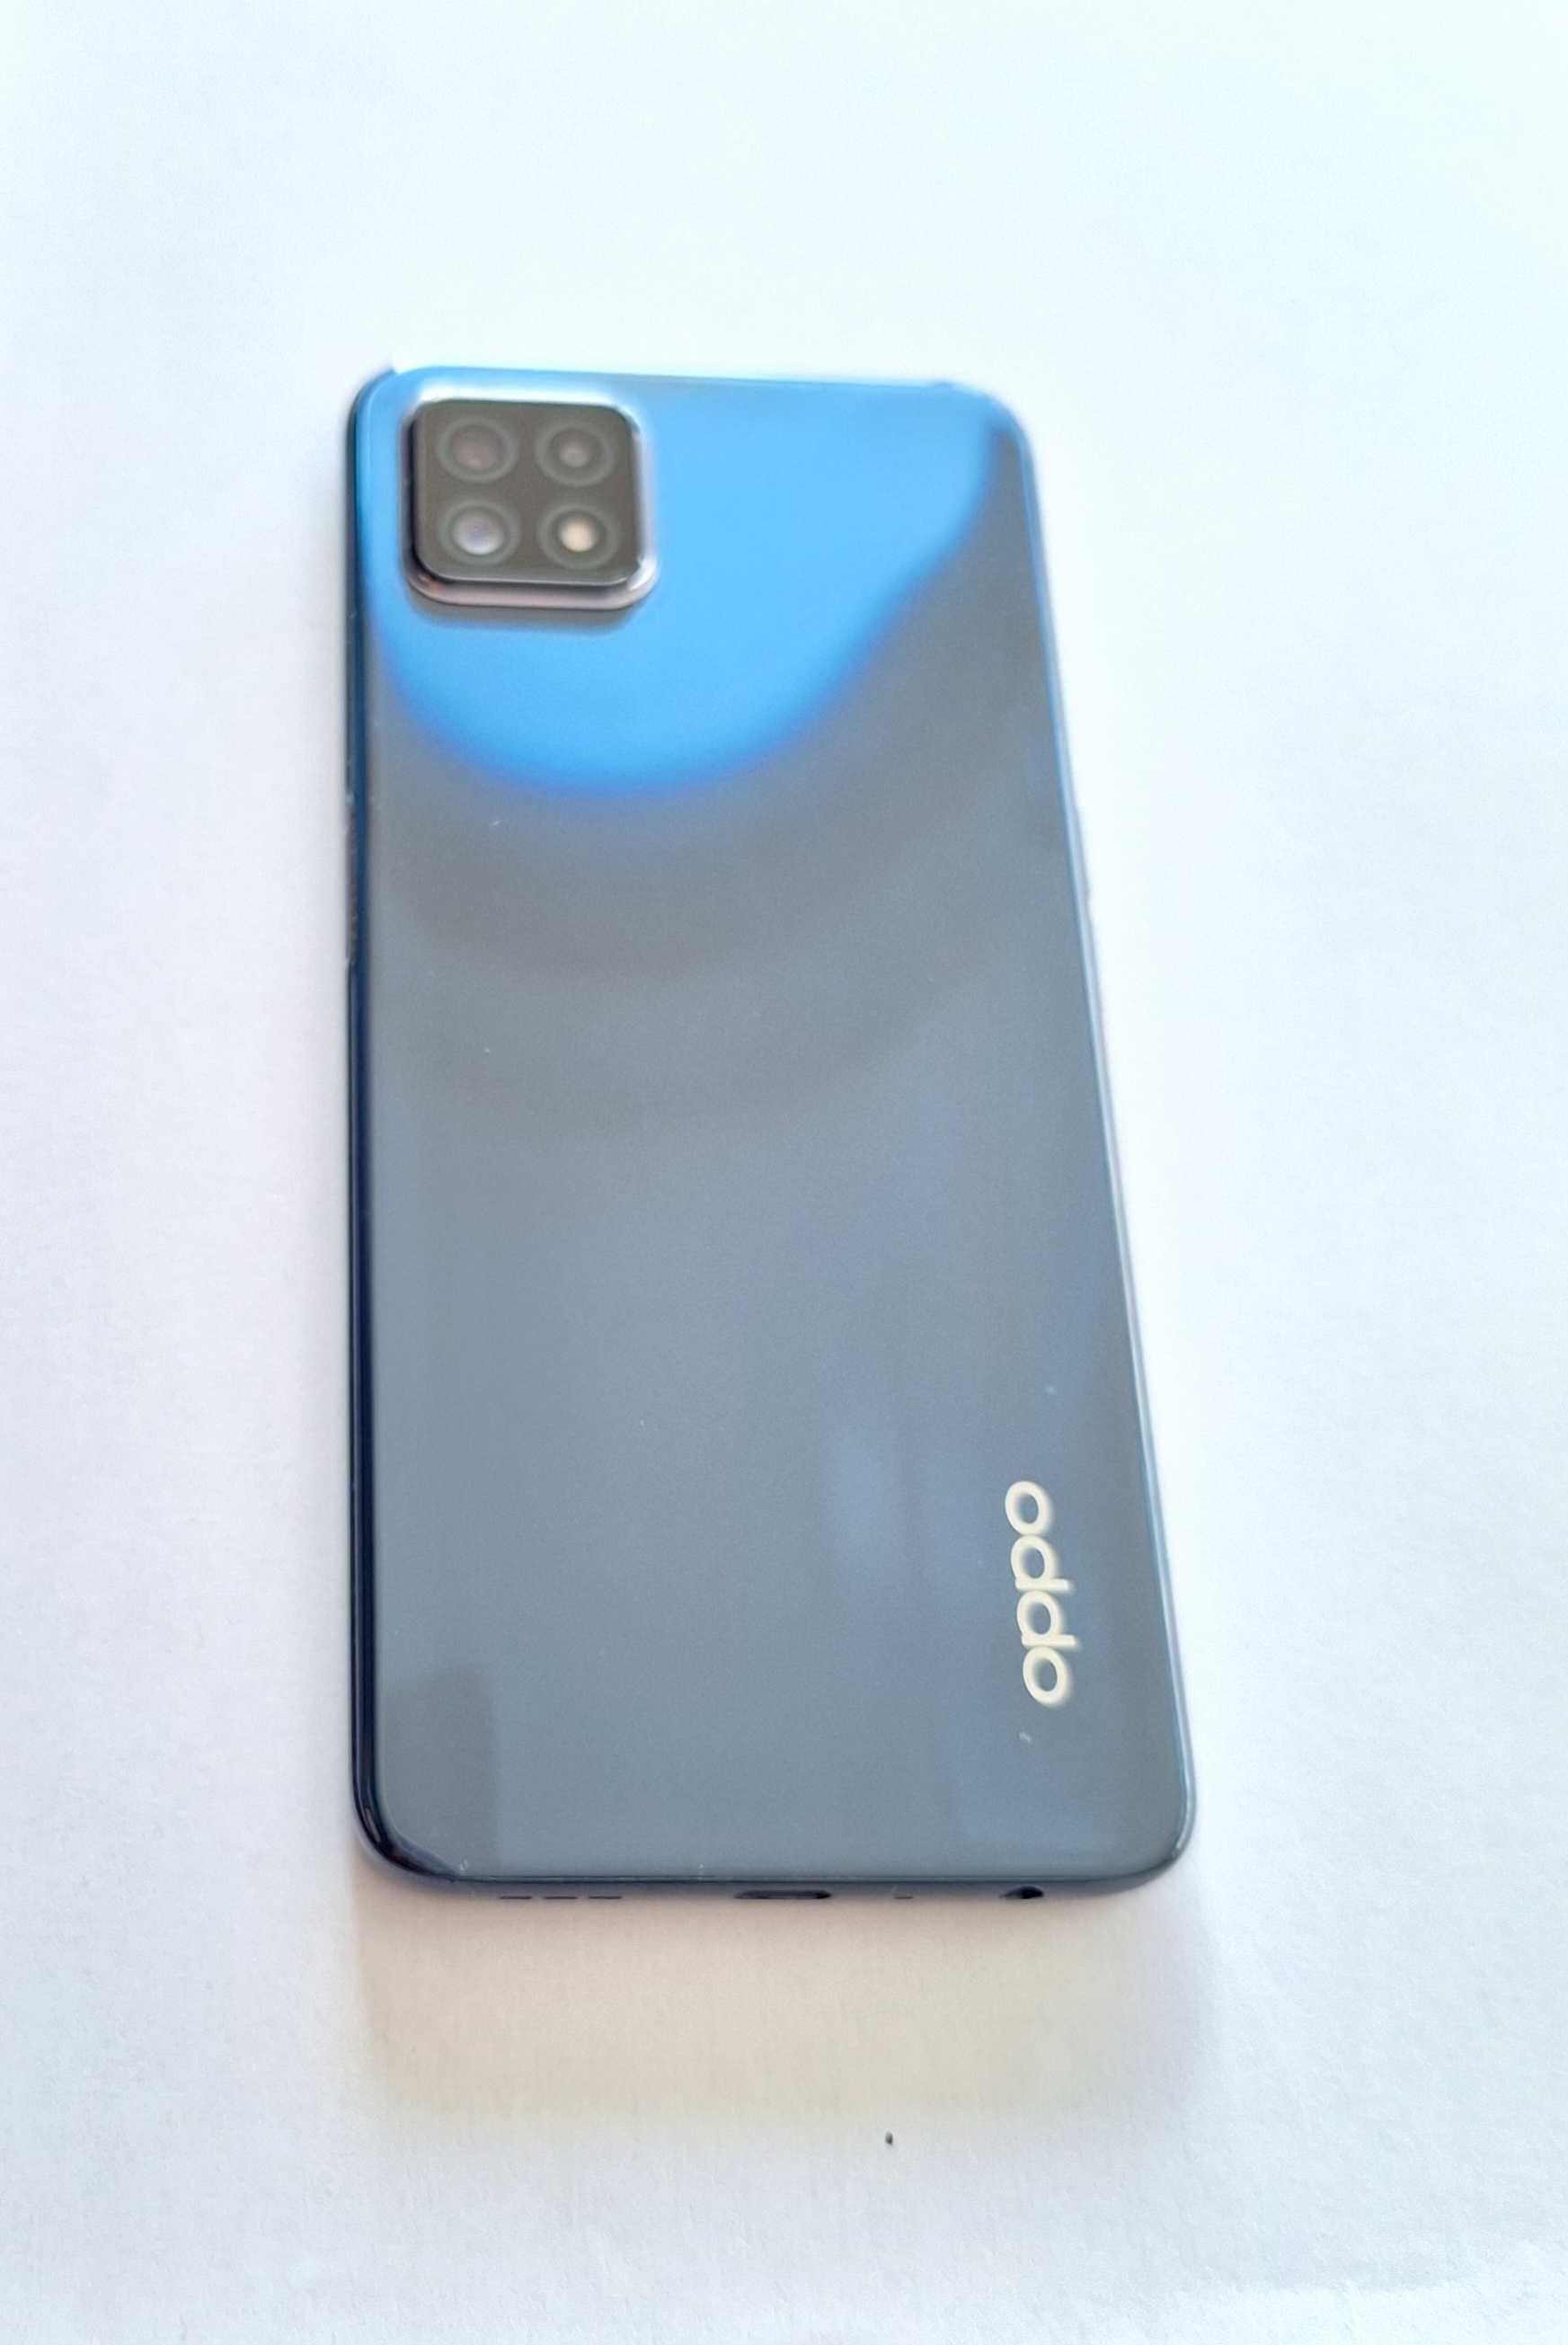 Smart Phone OPPO A73 128Gb